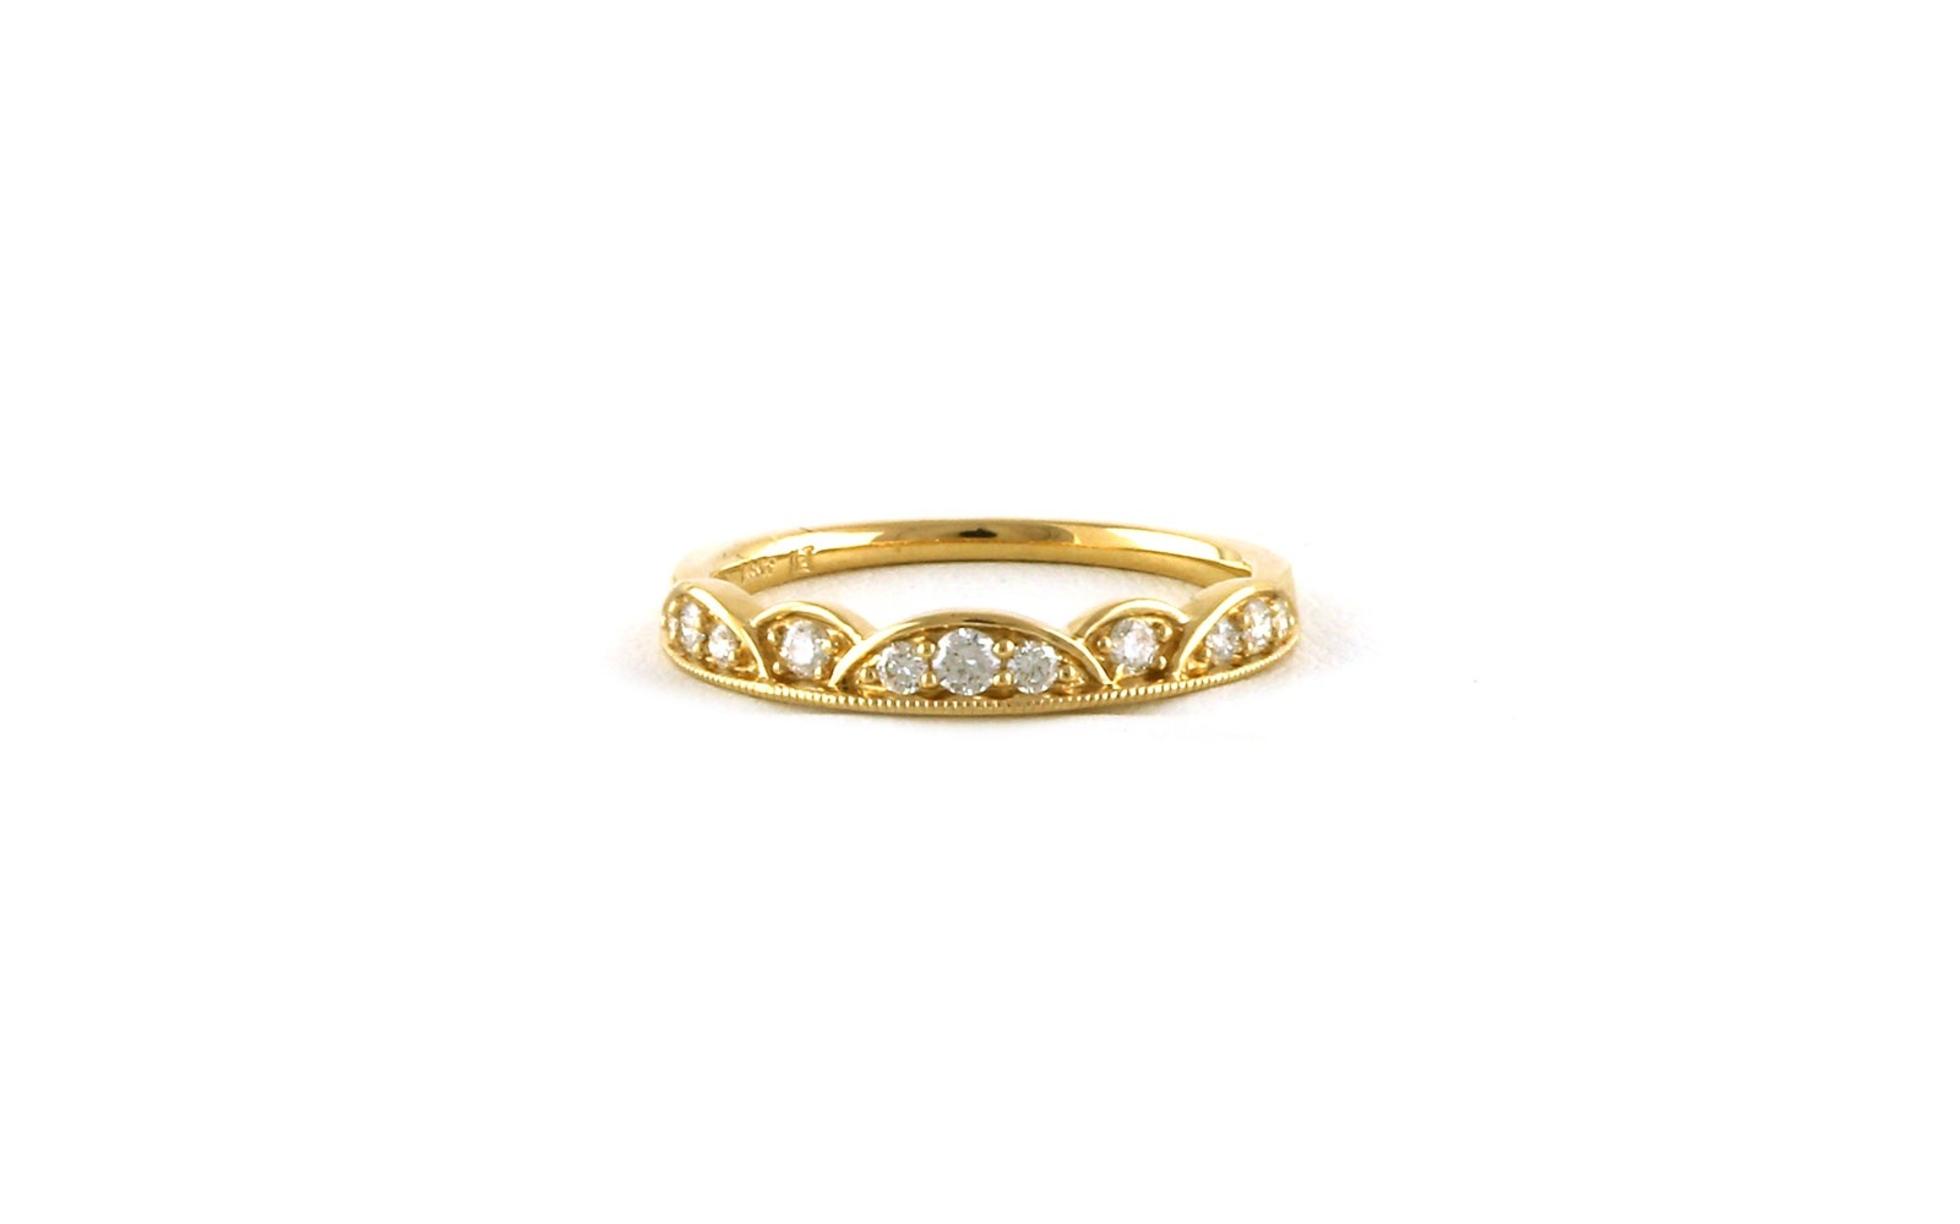 Scalloped Edge Diamond Wedding Band in Yellow Gold (0.23cts TWT)